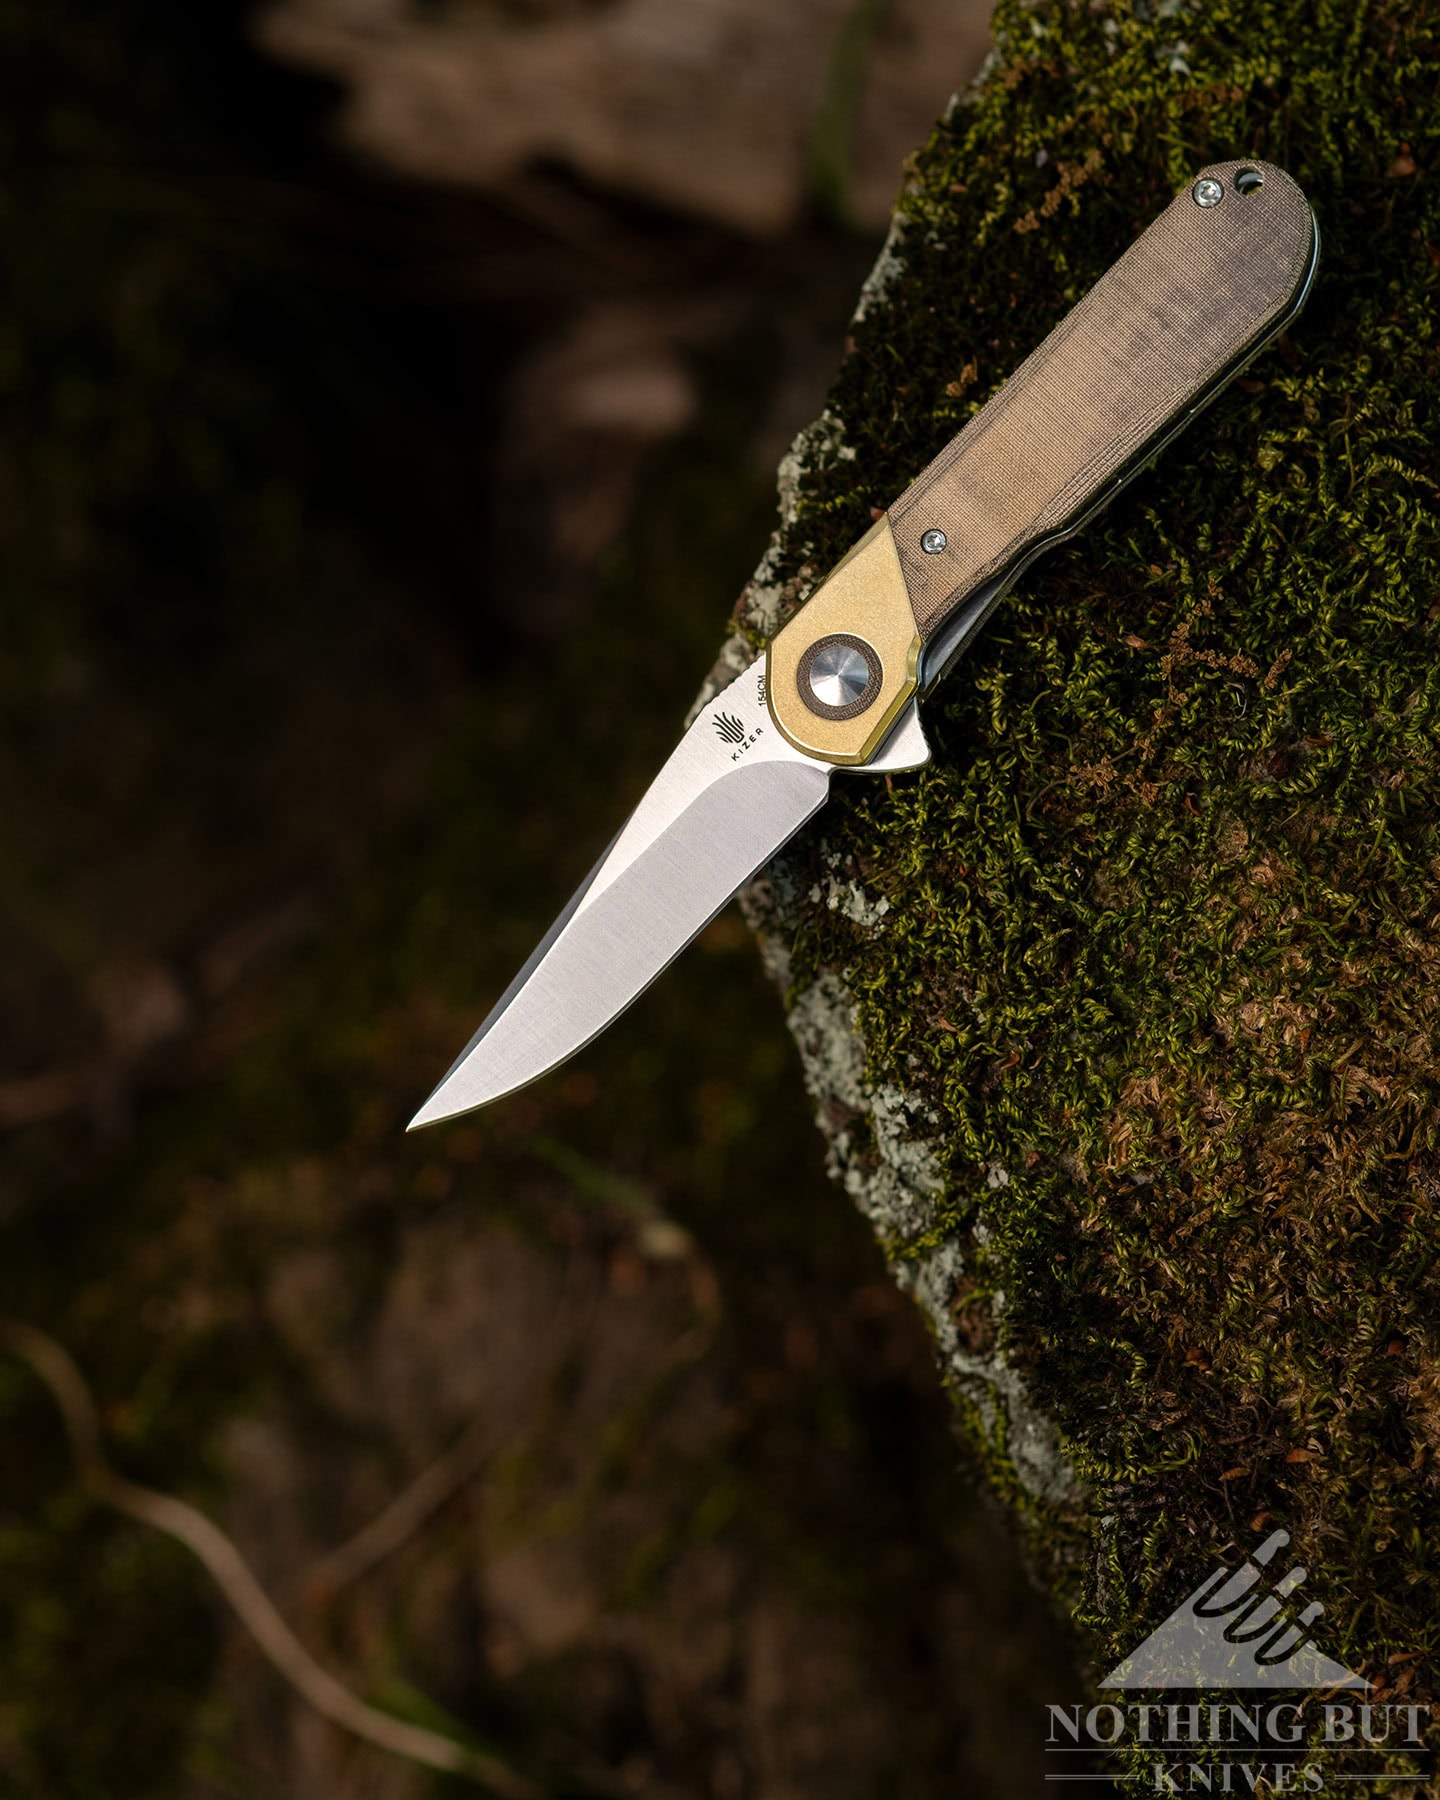 The Kizer Comet sits open on the edge of a mossy rock.